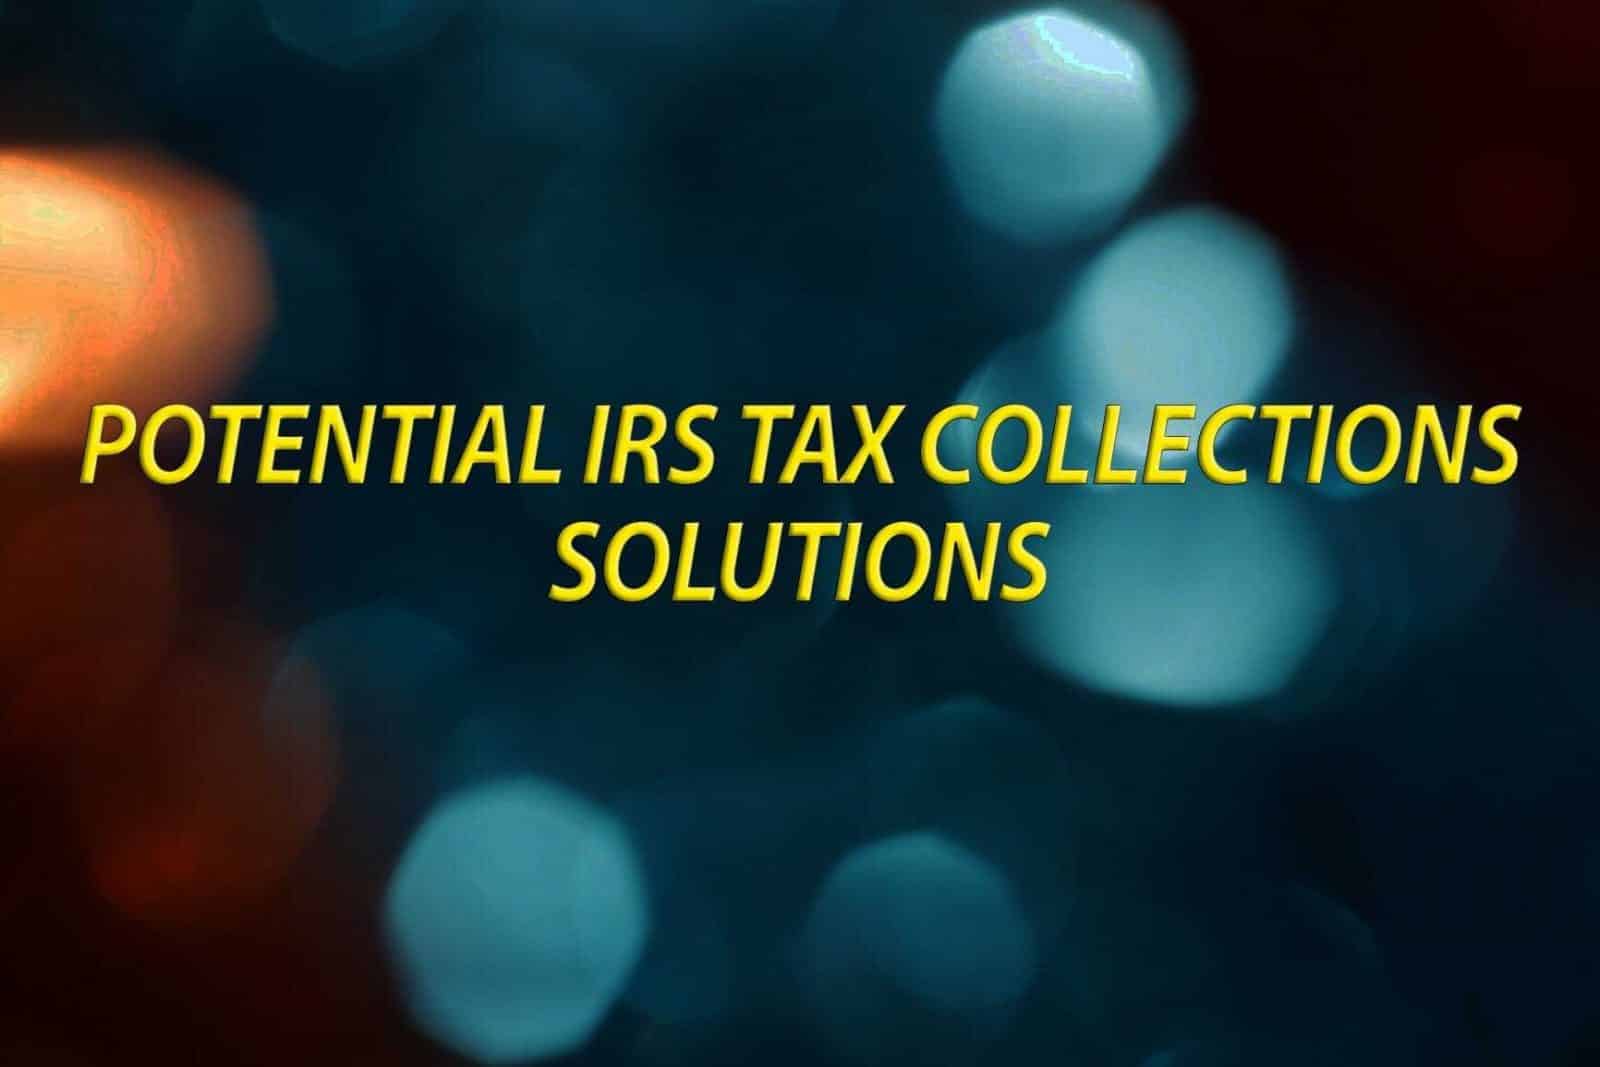 Potential IRS Tax Collection Solutions